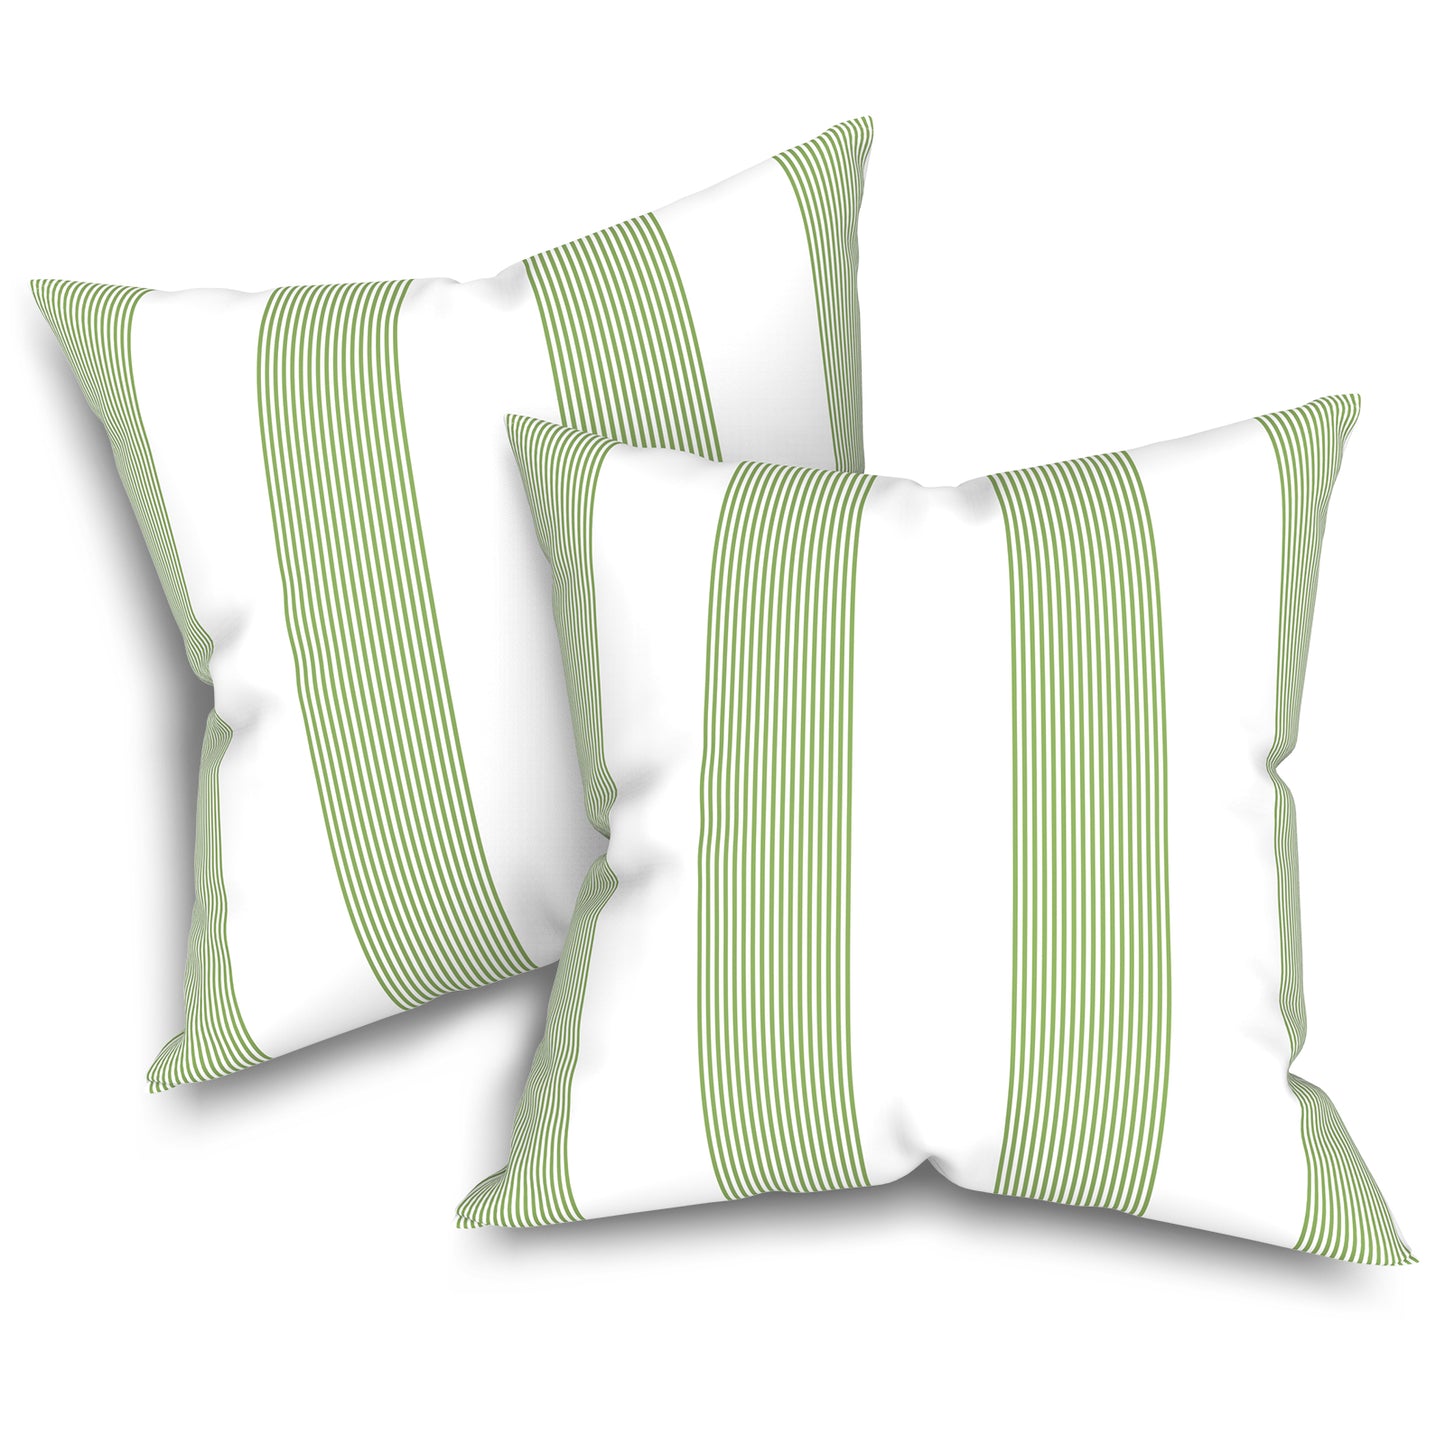 Melody Elephant Outdoor Throw Pillow Covers Pack of 2, Decorative Water Repellent Square Pillow Cases 18x18 Inch, Patio Pillowcases for Home Patio Furniture Use, Stripe Cabana Green